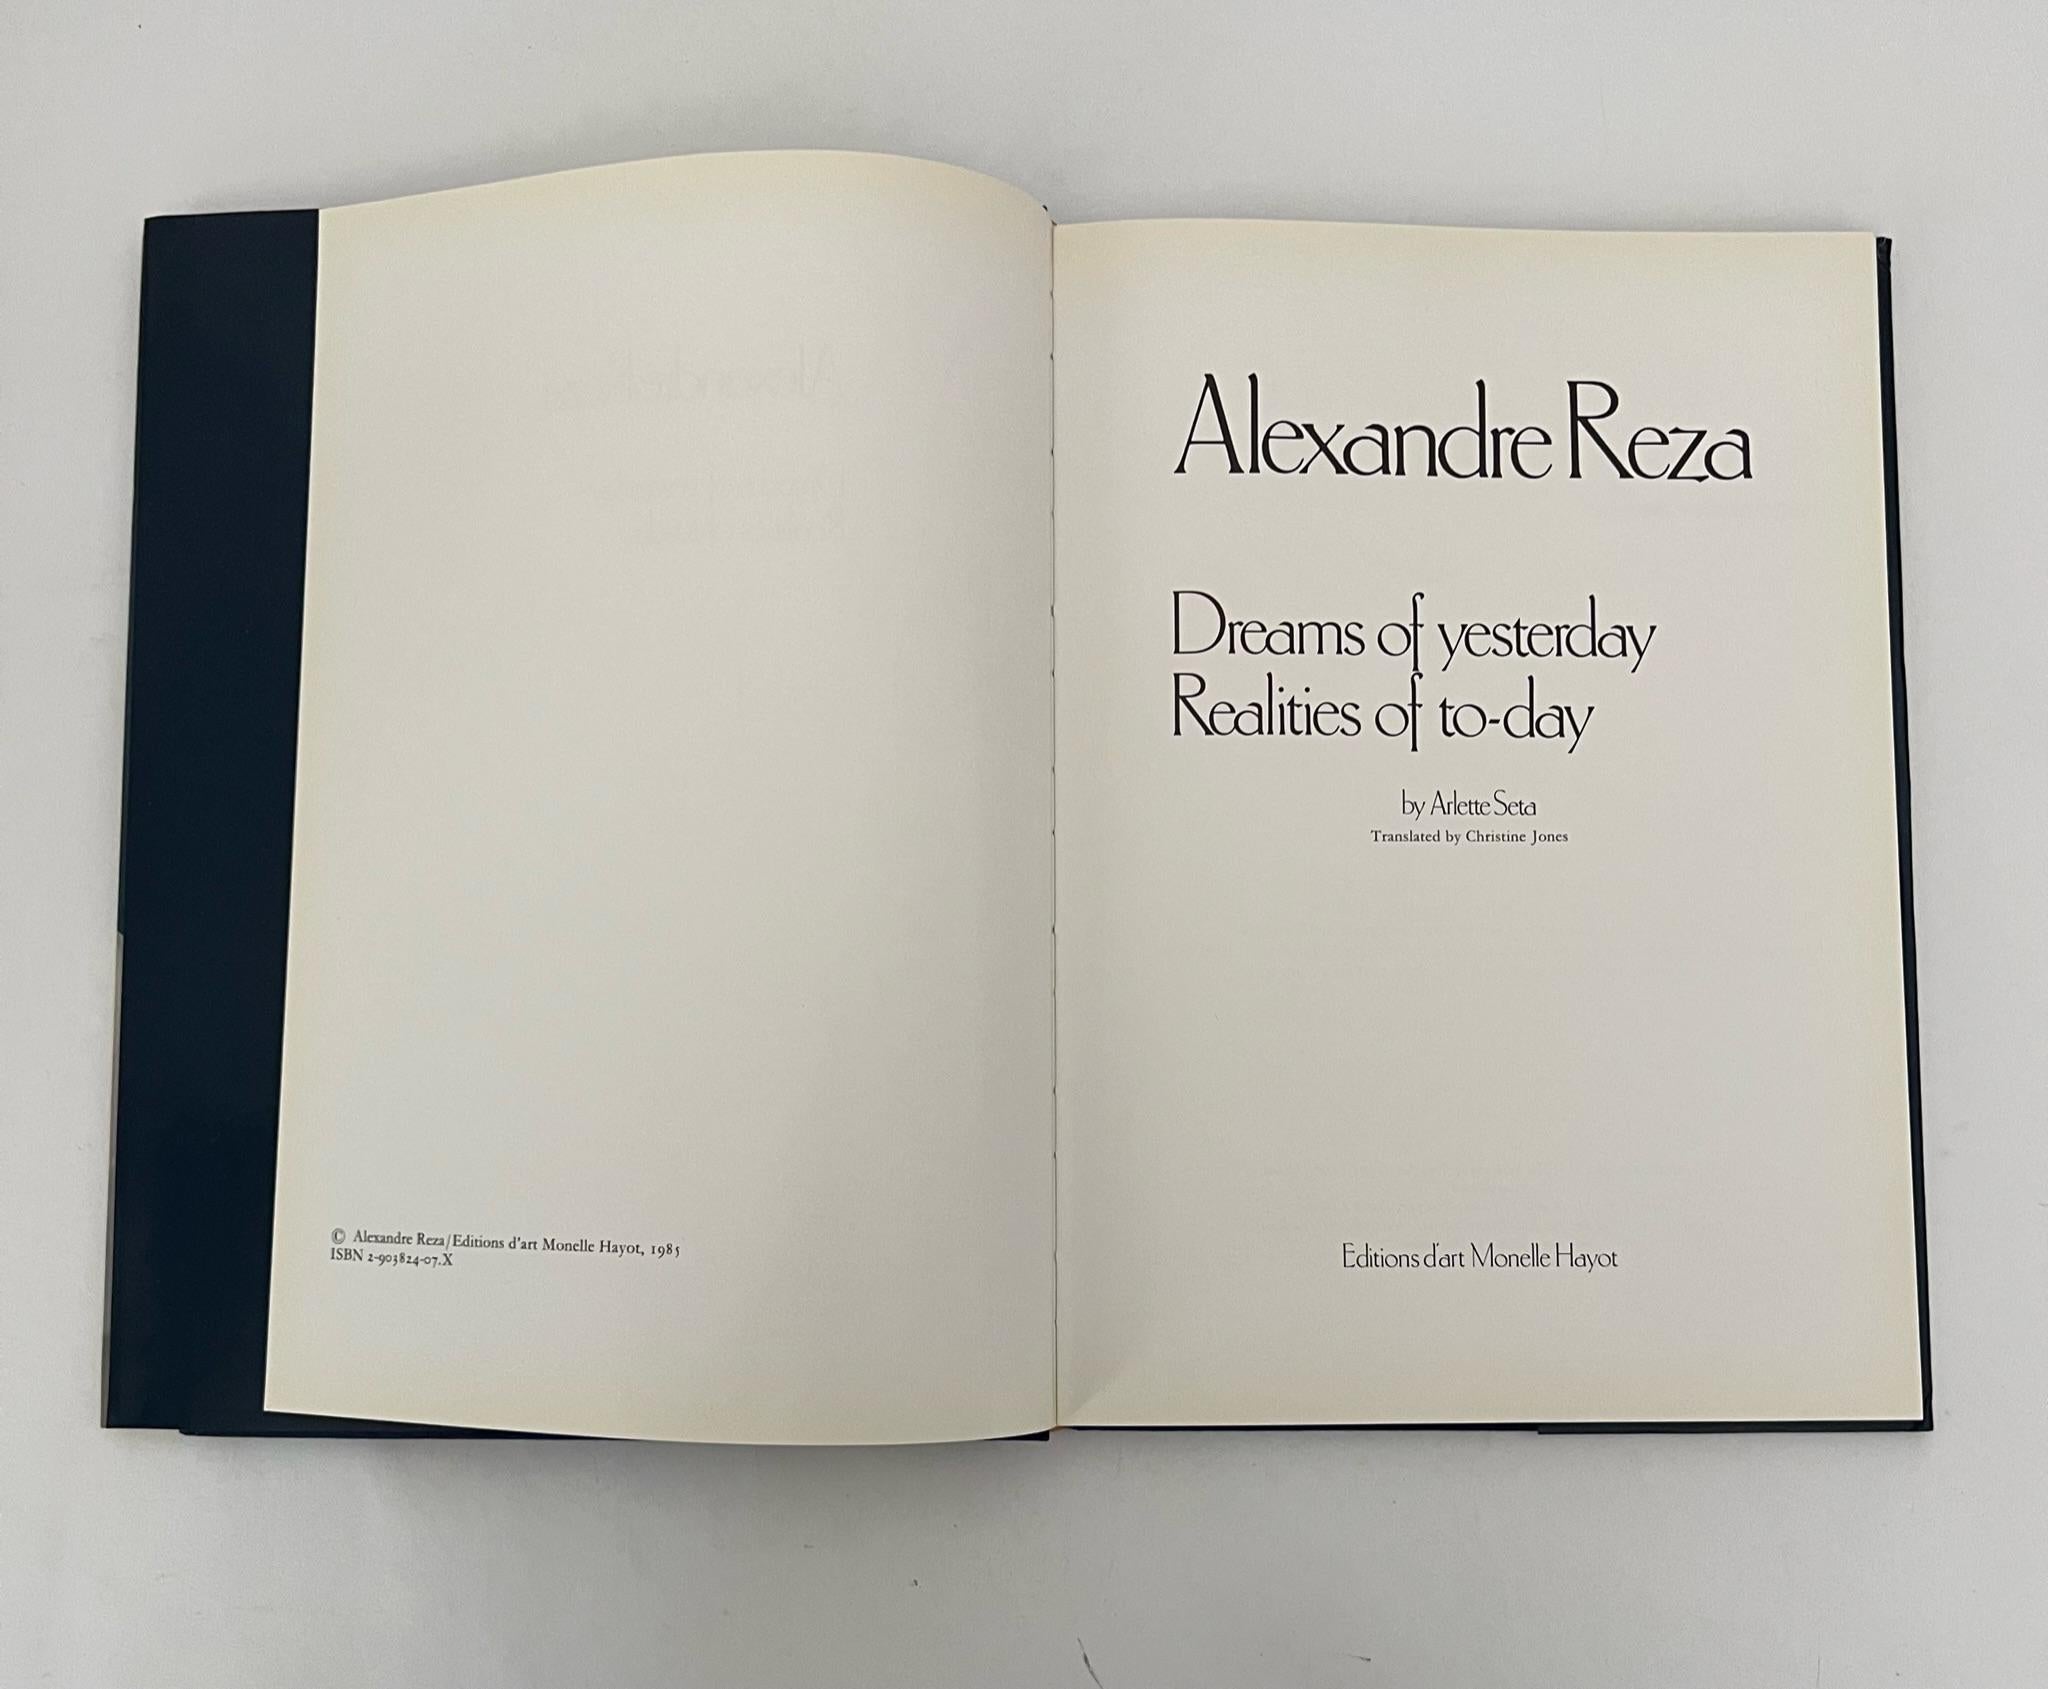 Gray Alexandre Reza Dreams of Yesterday Realities of To-Day Book by Arlette Seta 1985 For Sale